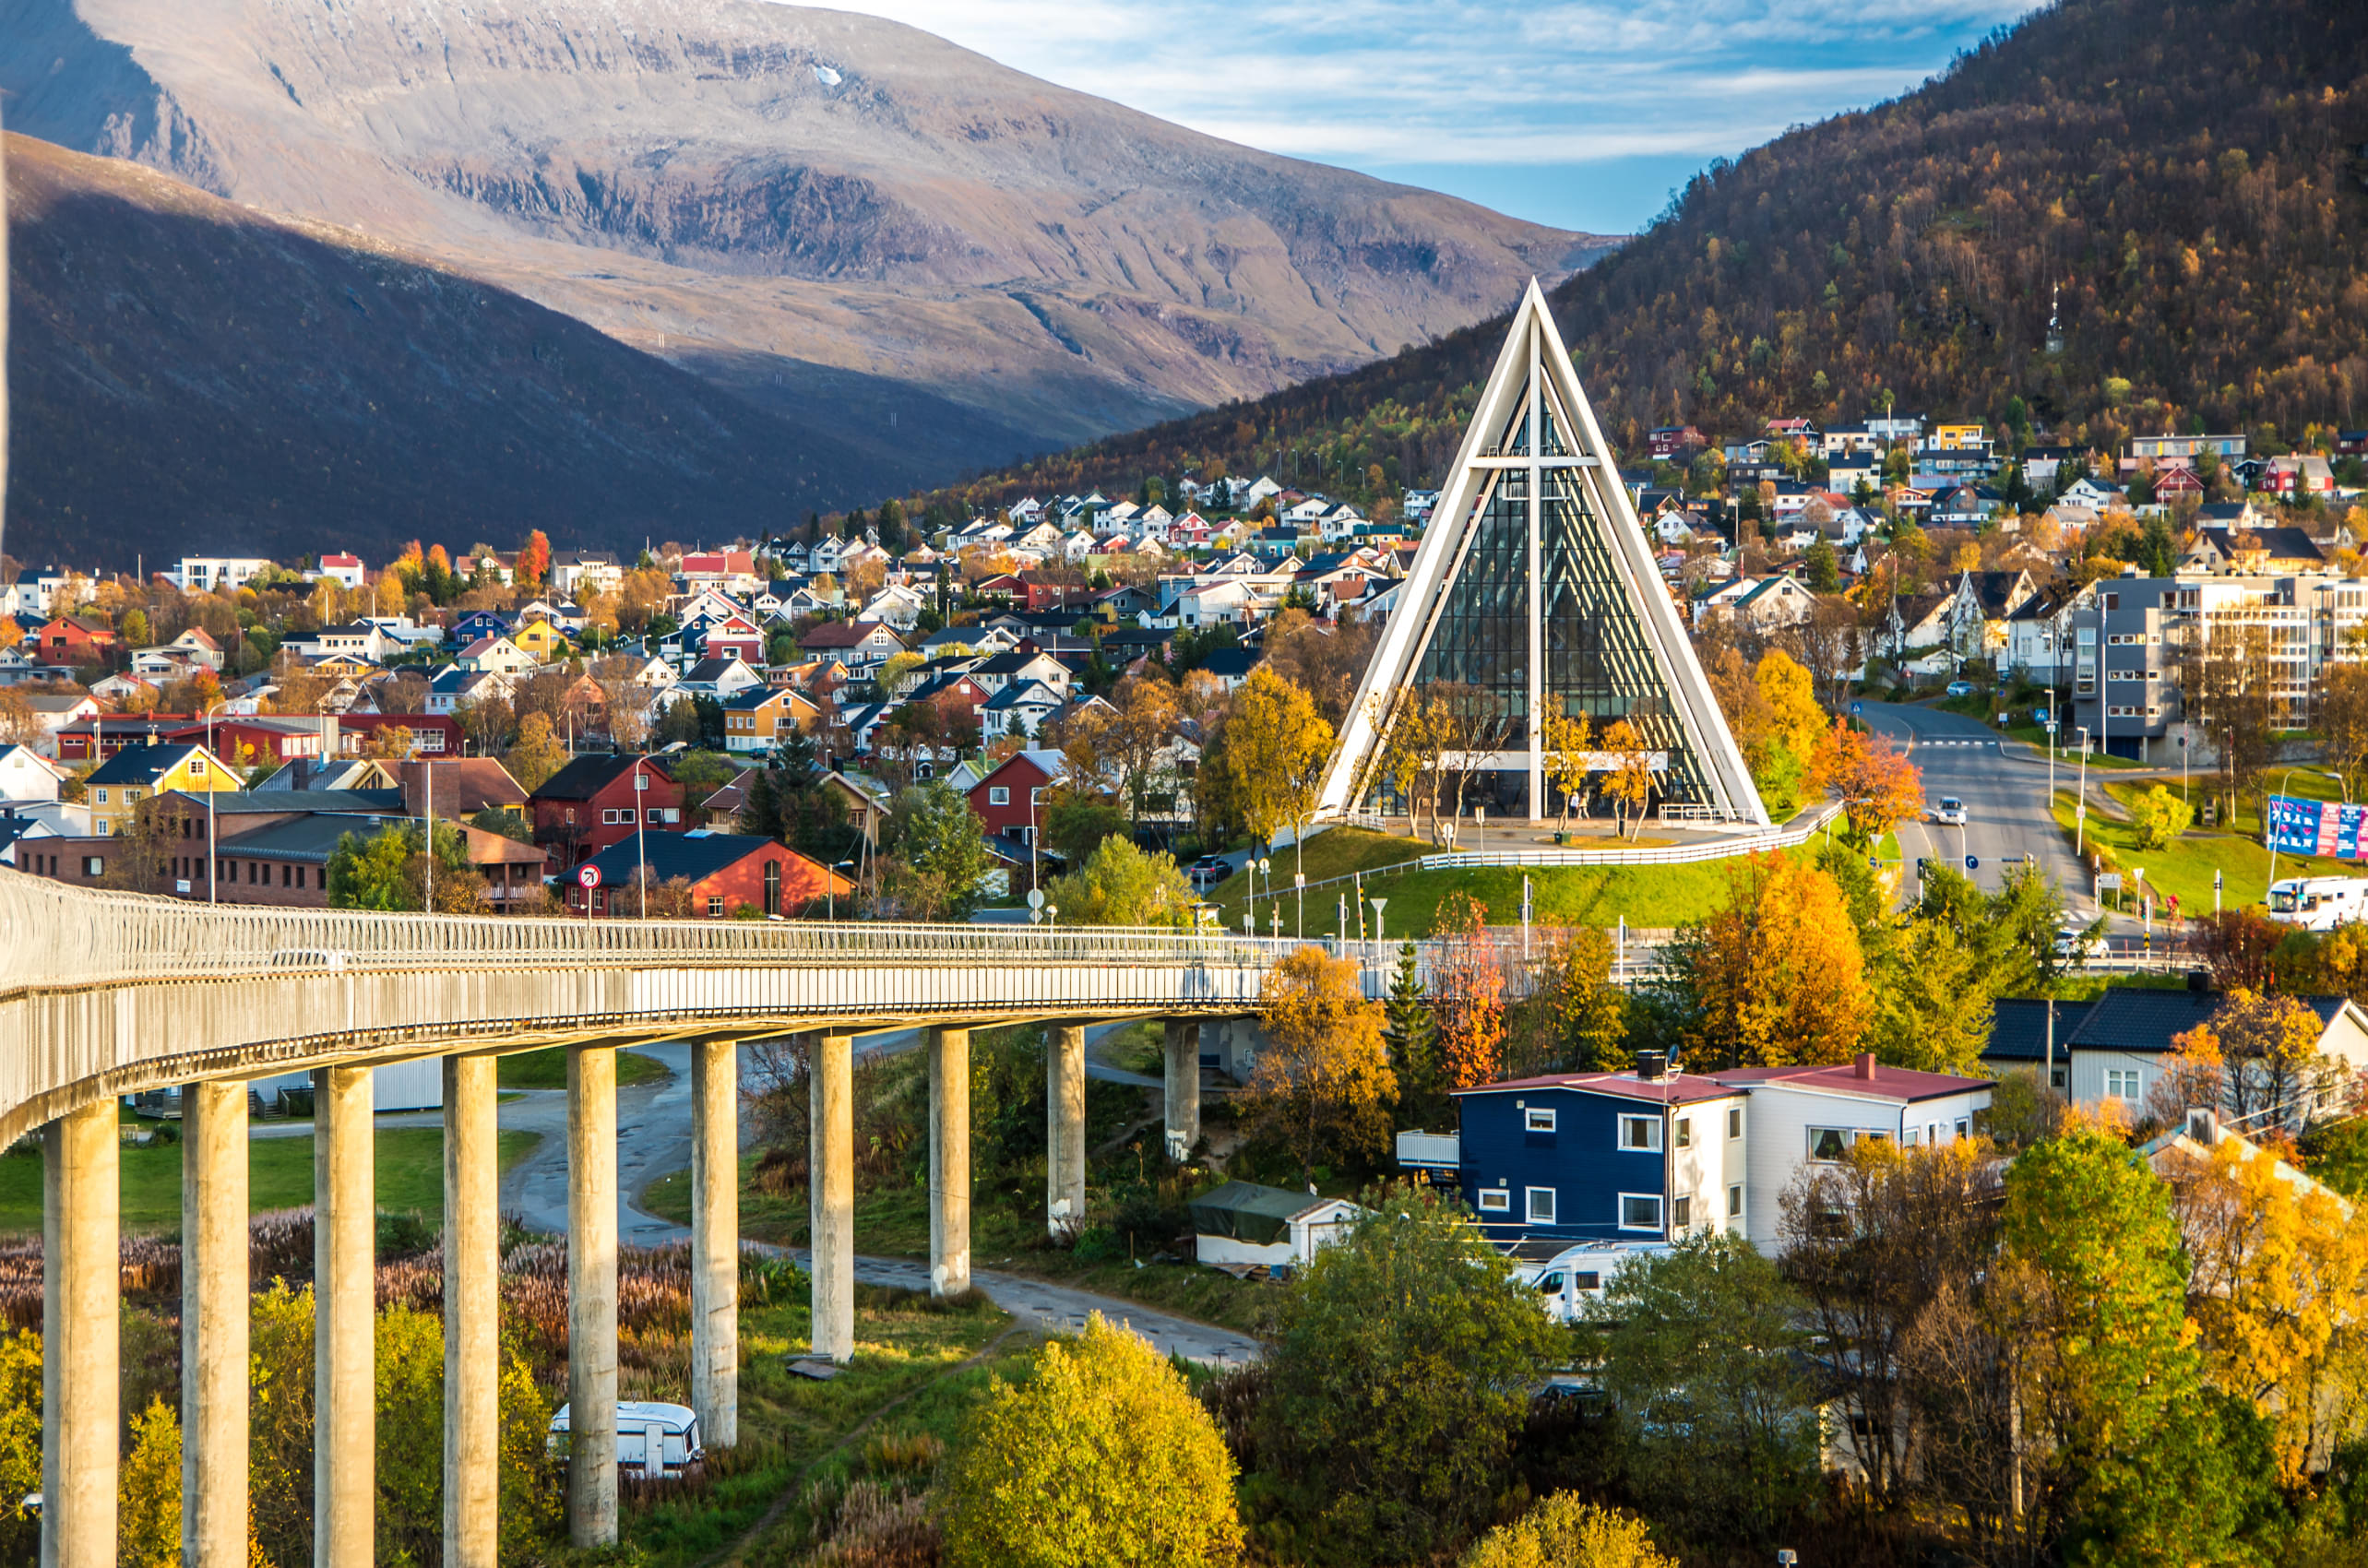 Things to Do in Tromso